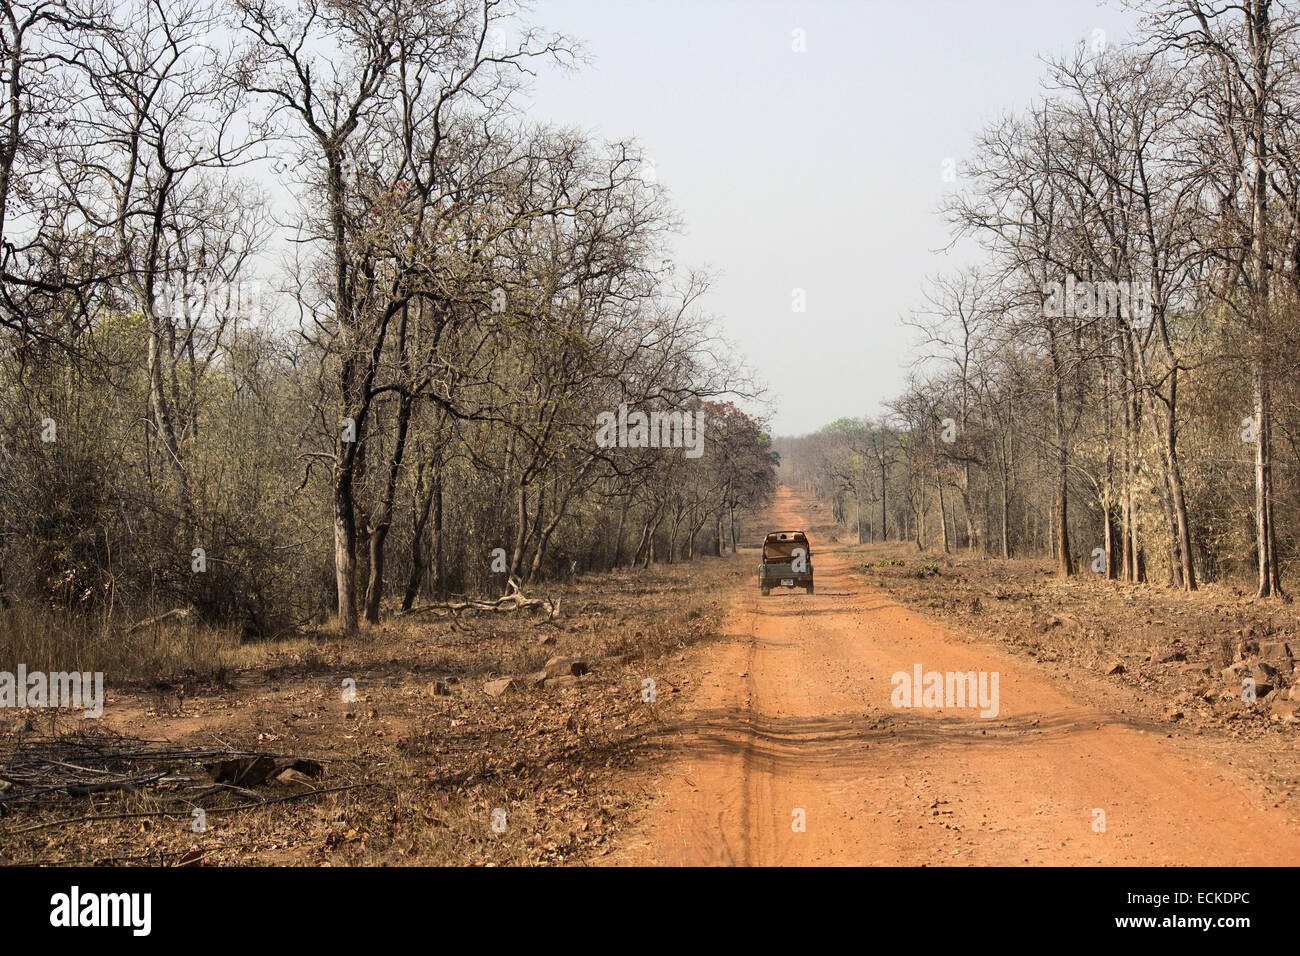 Tadoba National Park High Resolution Stock Photography And Images Alamy